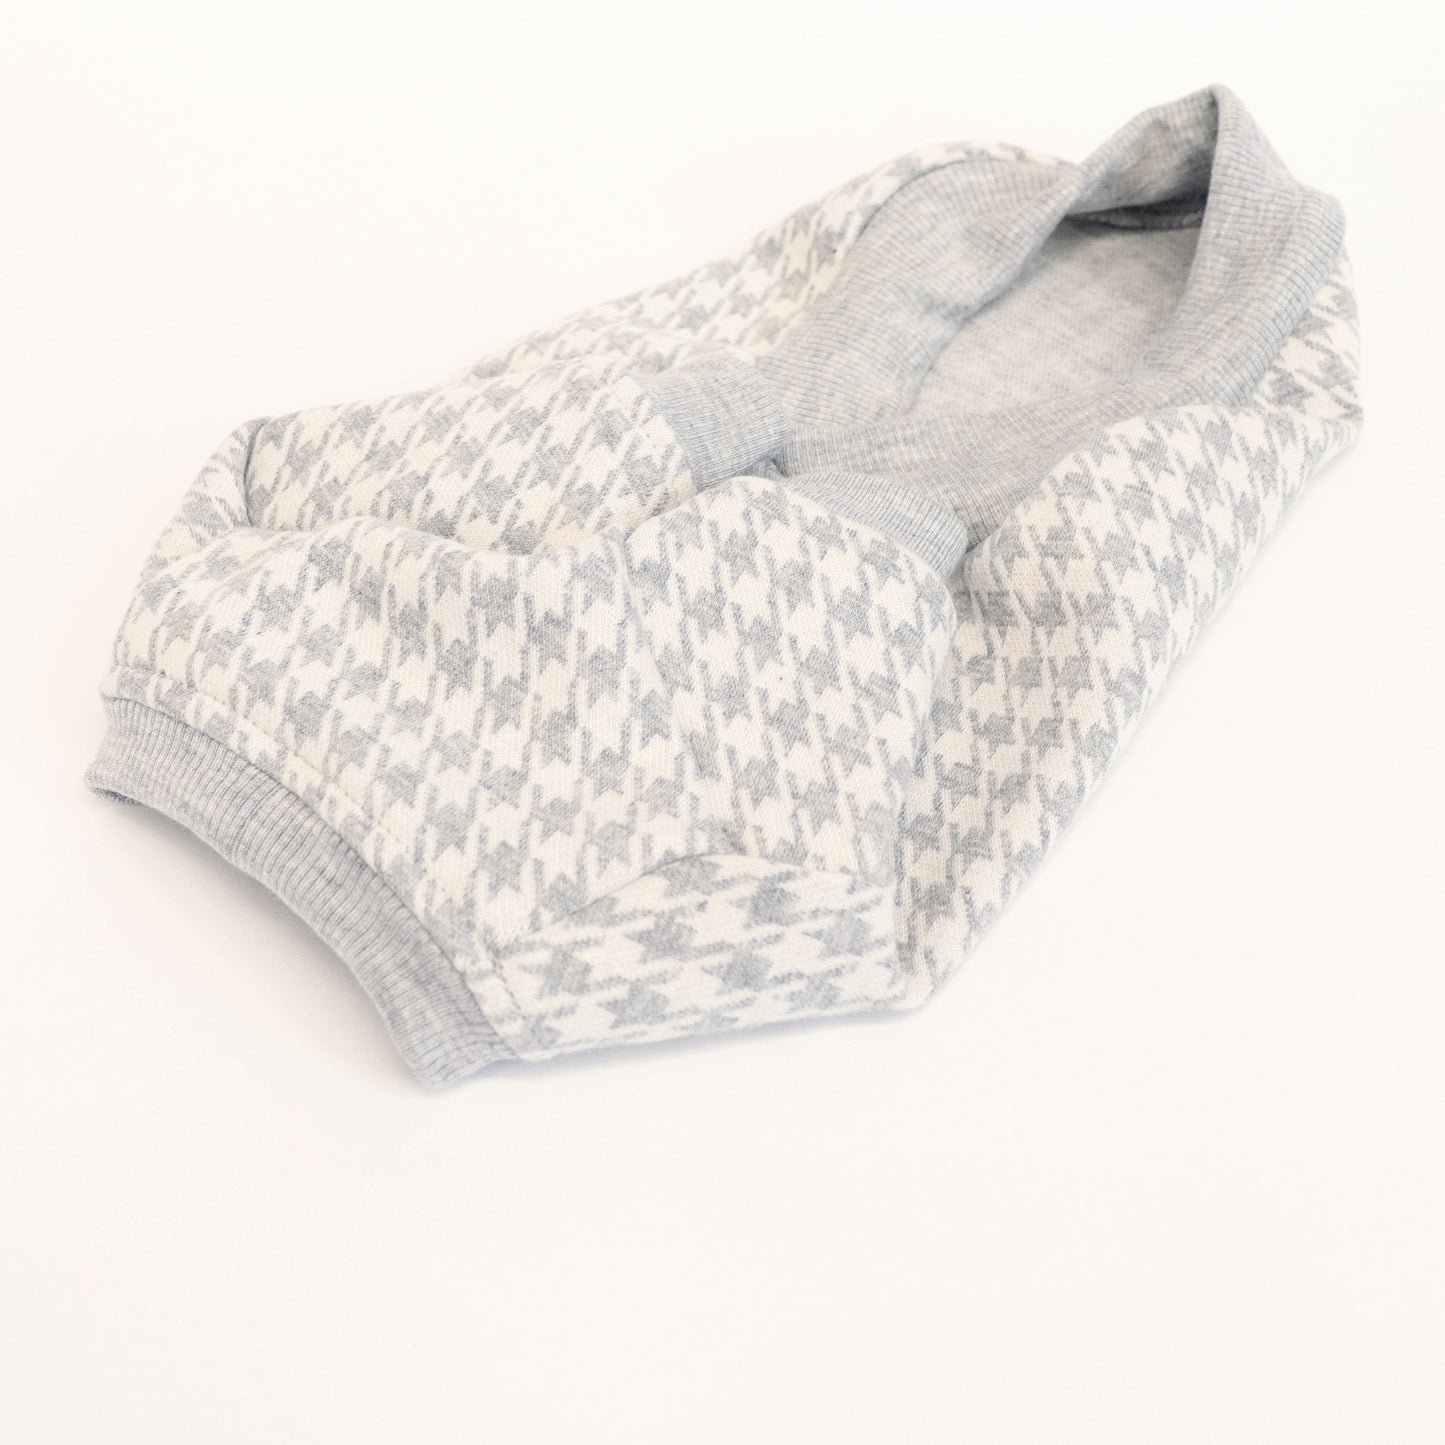 LCB Houndstooth Sweater Top - Grey